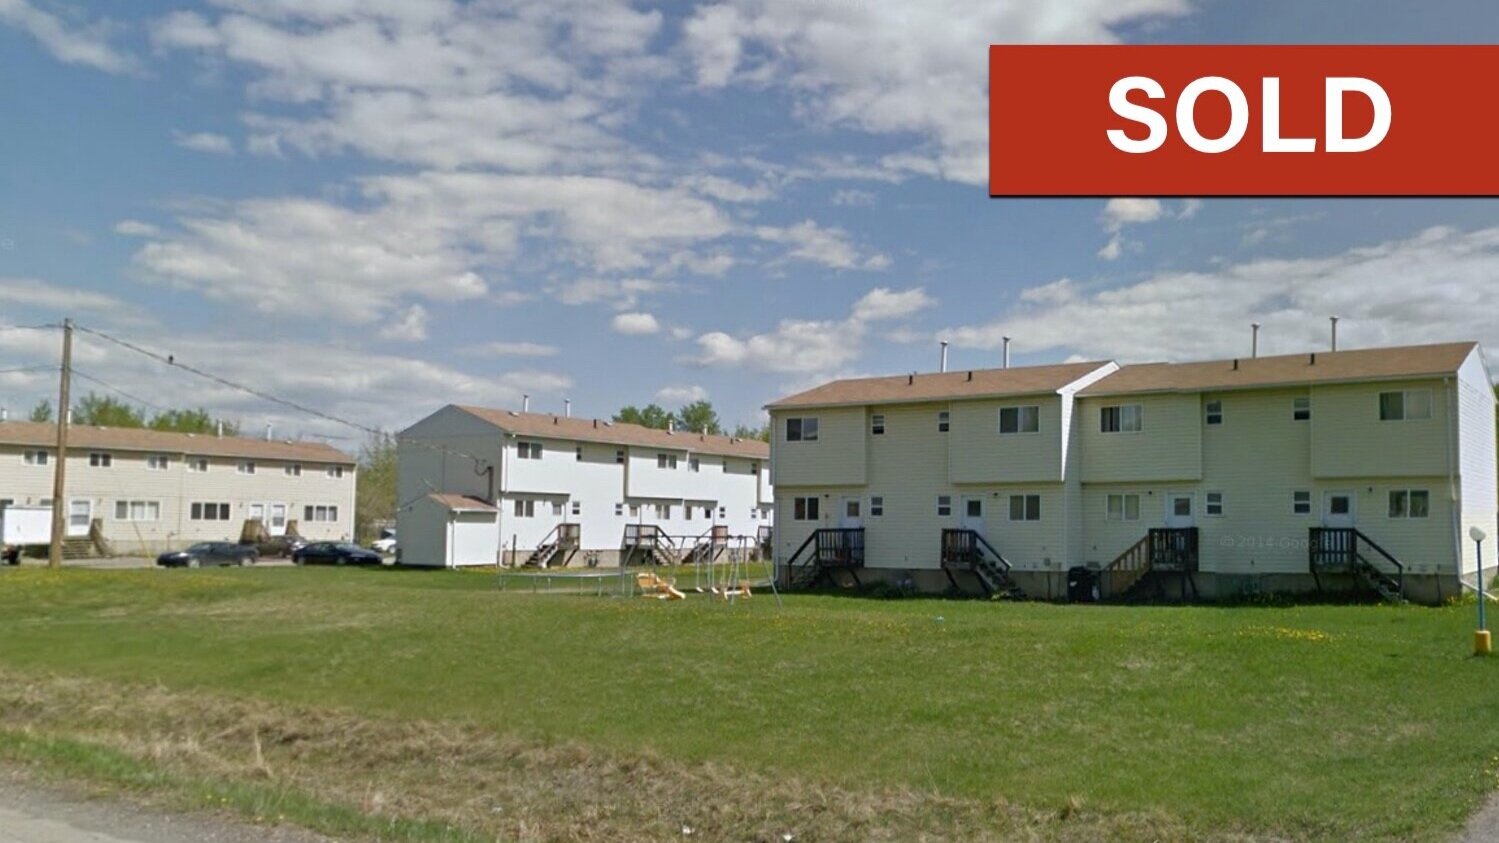 woodside-estates-5206-5216-43rd-st-ne-chetwynd-sold-townhome-complex-thumbnail.jpg